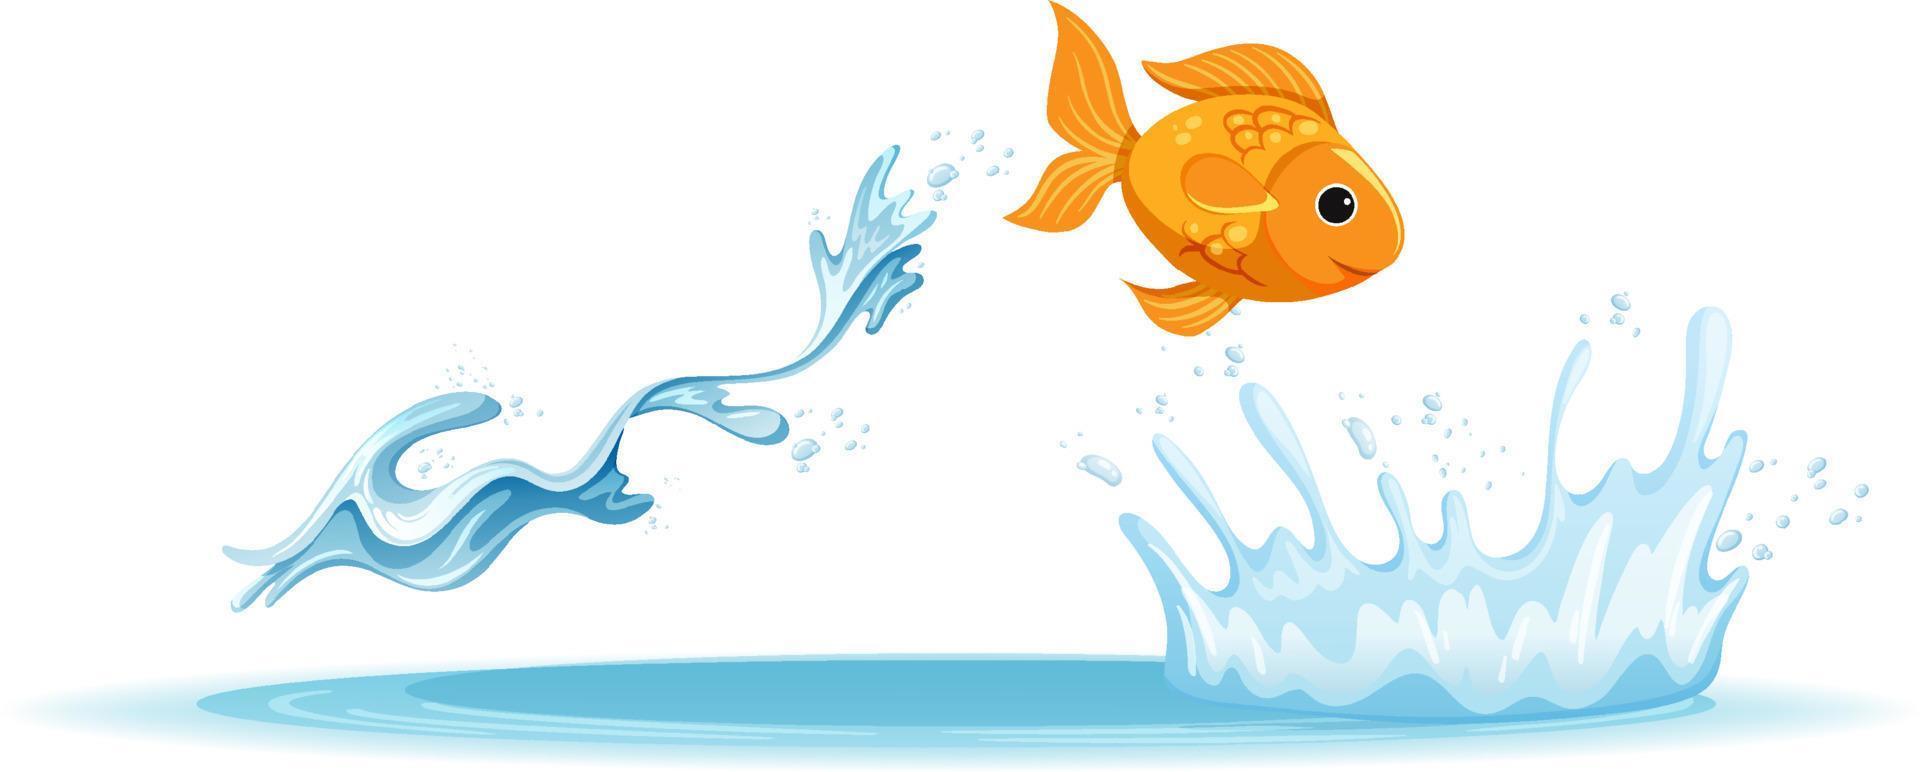 A water splash with goldfish on white background vector